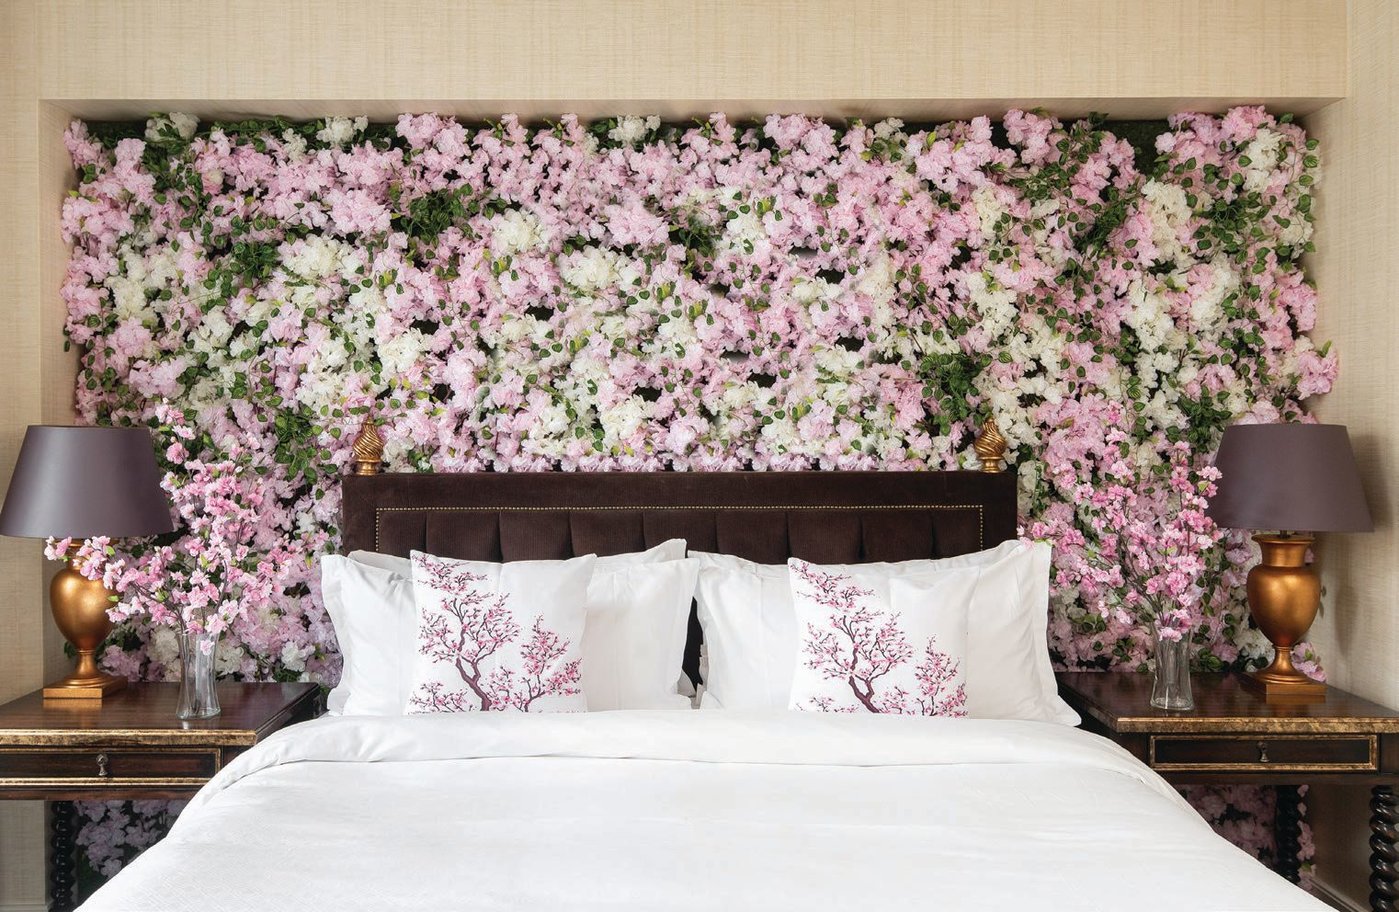 The St. Regis is the perfect retreat for cherry blossom season. PHOTO COURTESY OF THE ST. REGIS